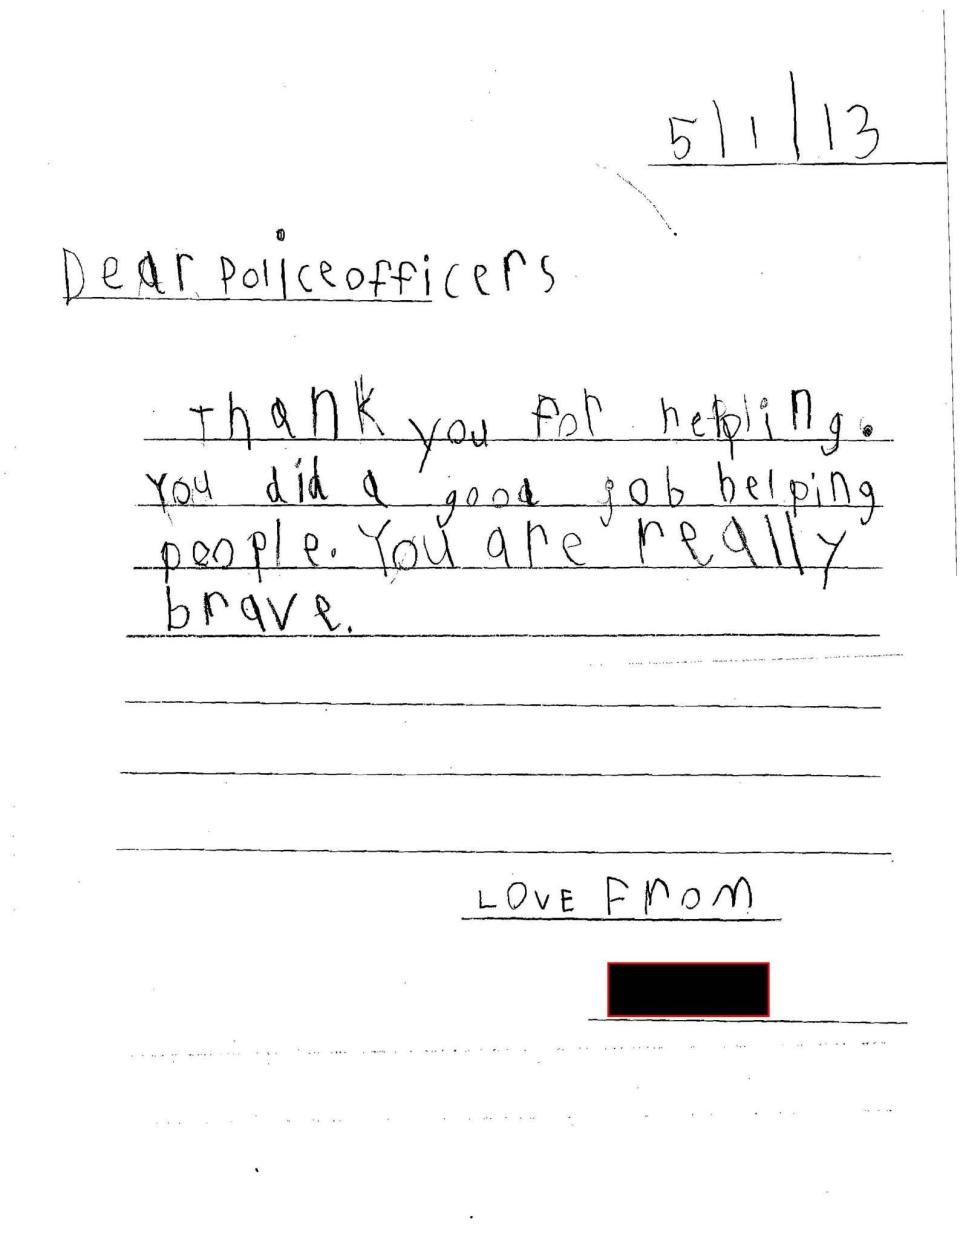 In the aftermath of April's Boston Marathon bombings, elementary students at the Lincoln School in Brookline, Mass., reached out to local law enforcement to thank them for the incredible job they'd done protecting their city.